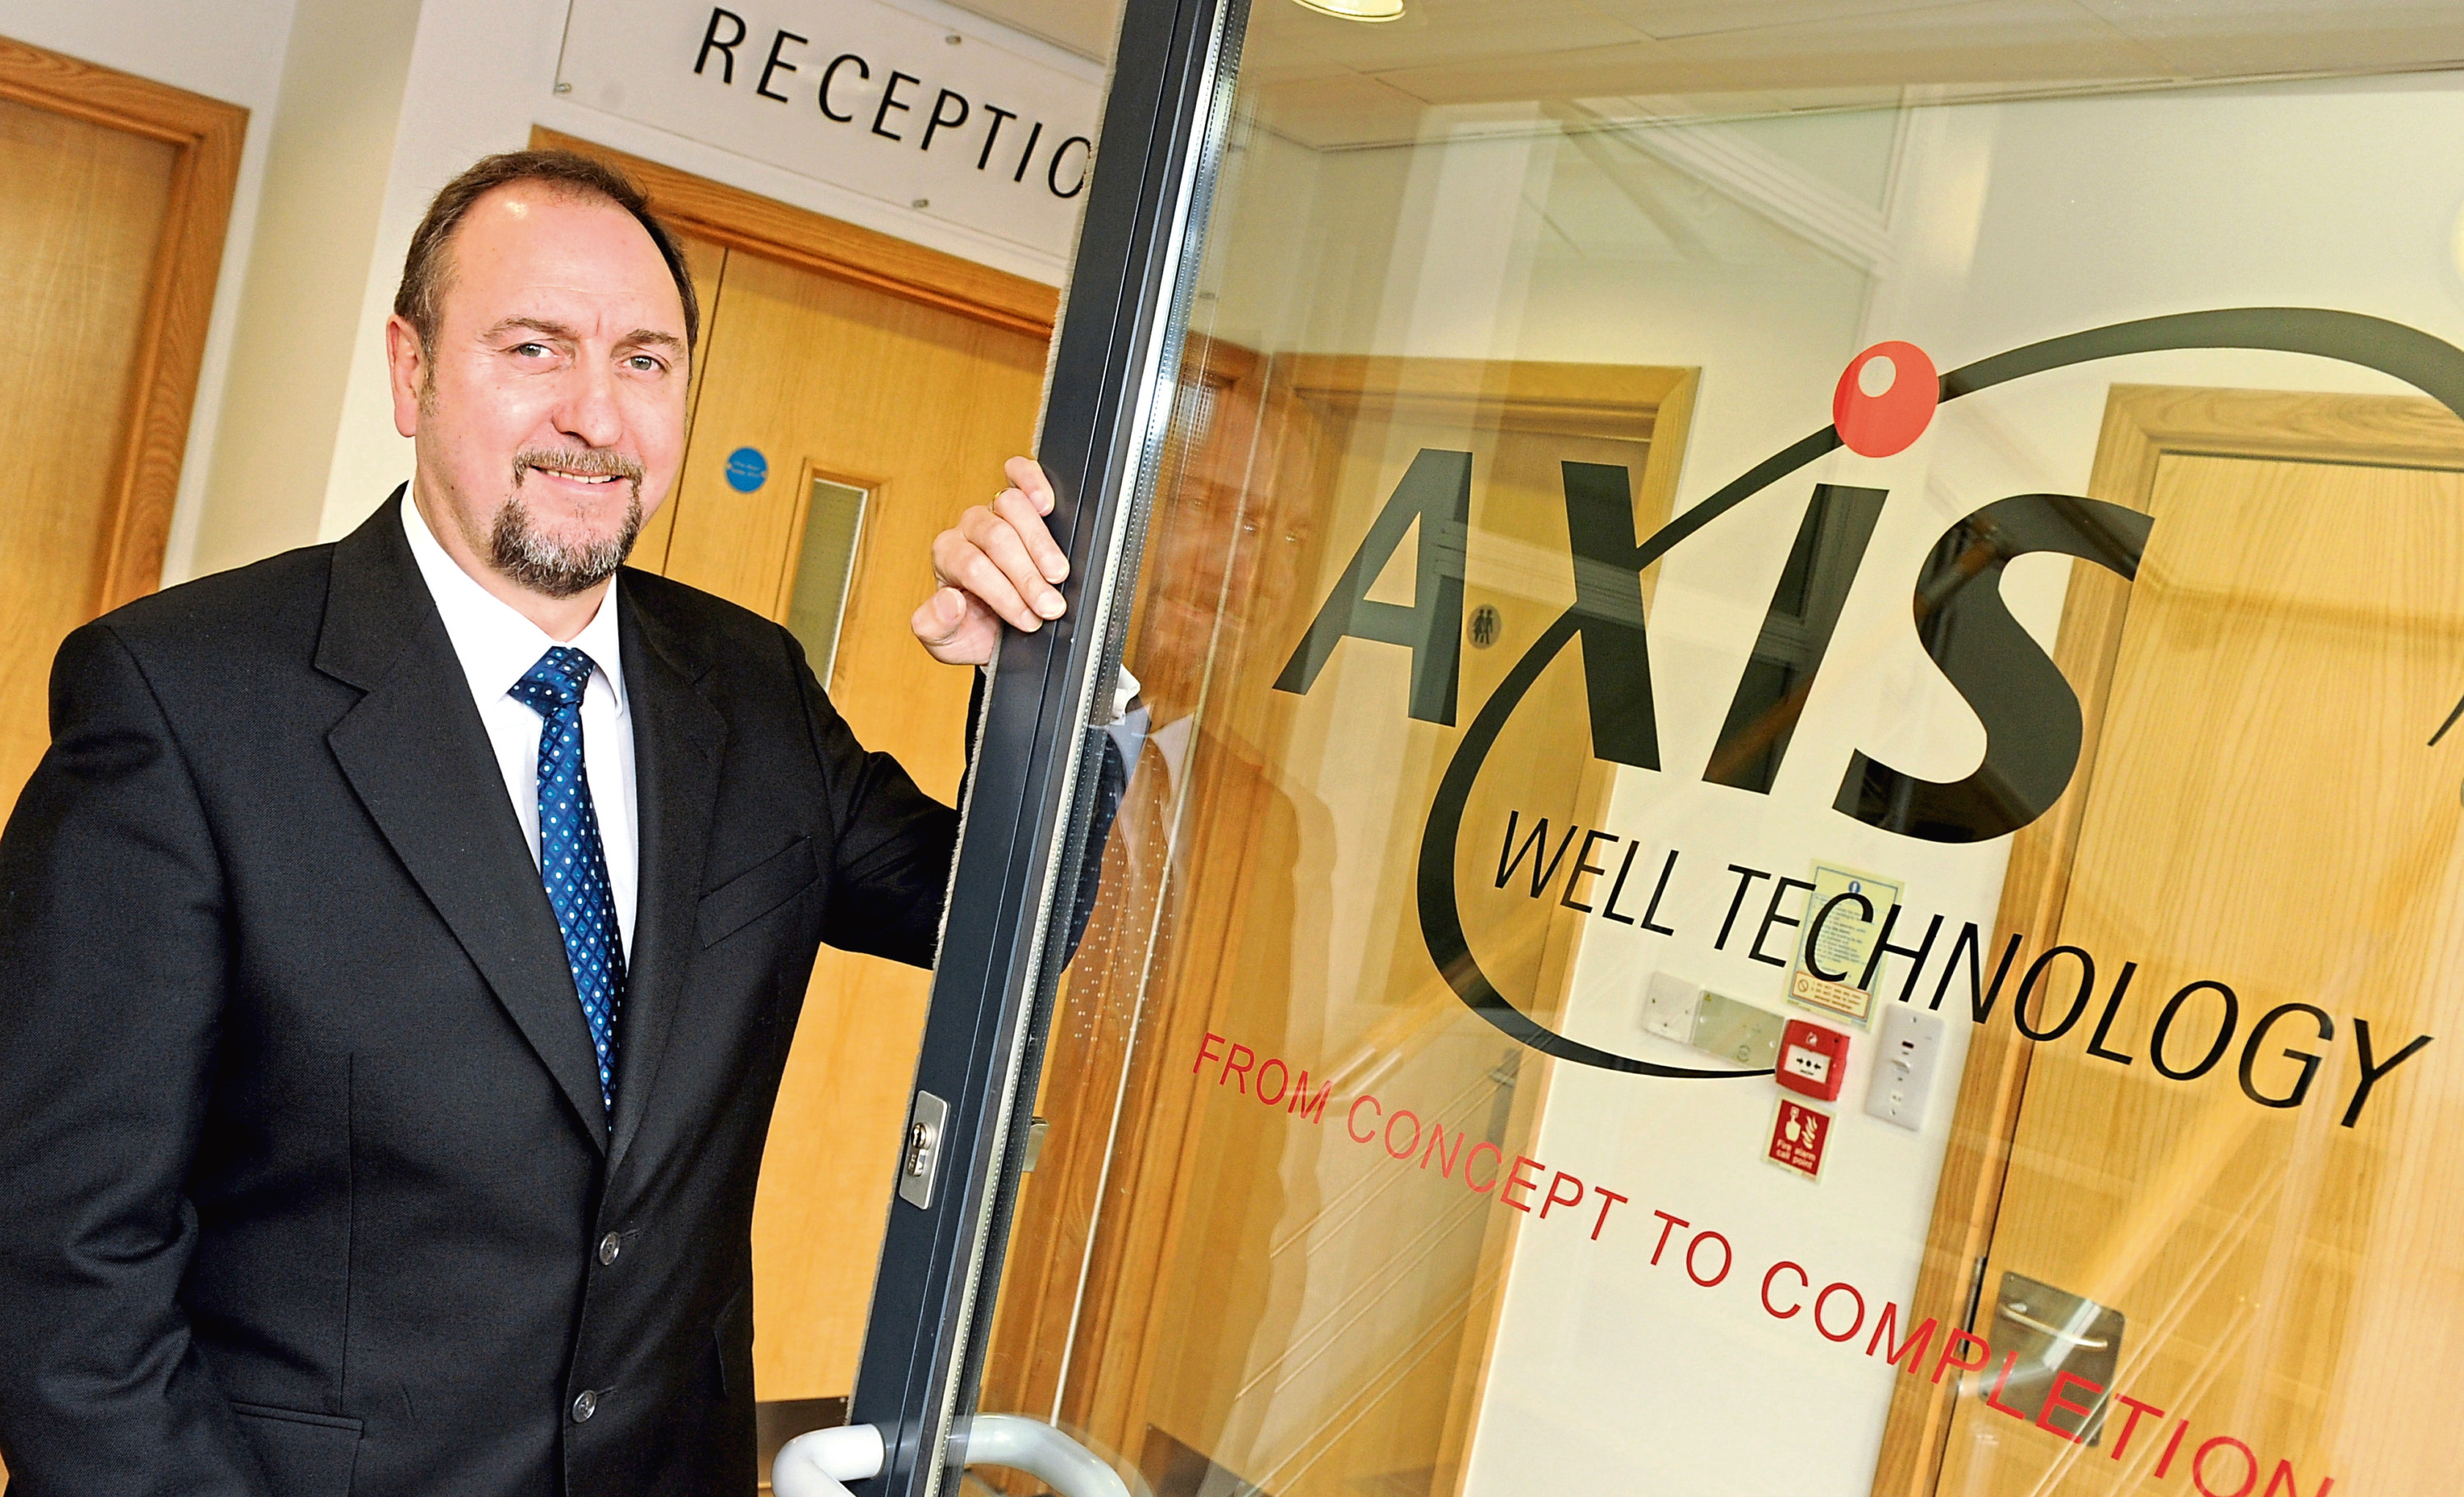 Jim Anderson is the chief executive of Aberdeen oil field services consultancy Axis Well Technology.